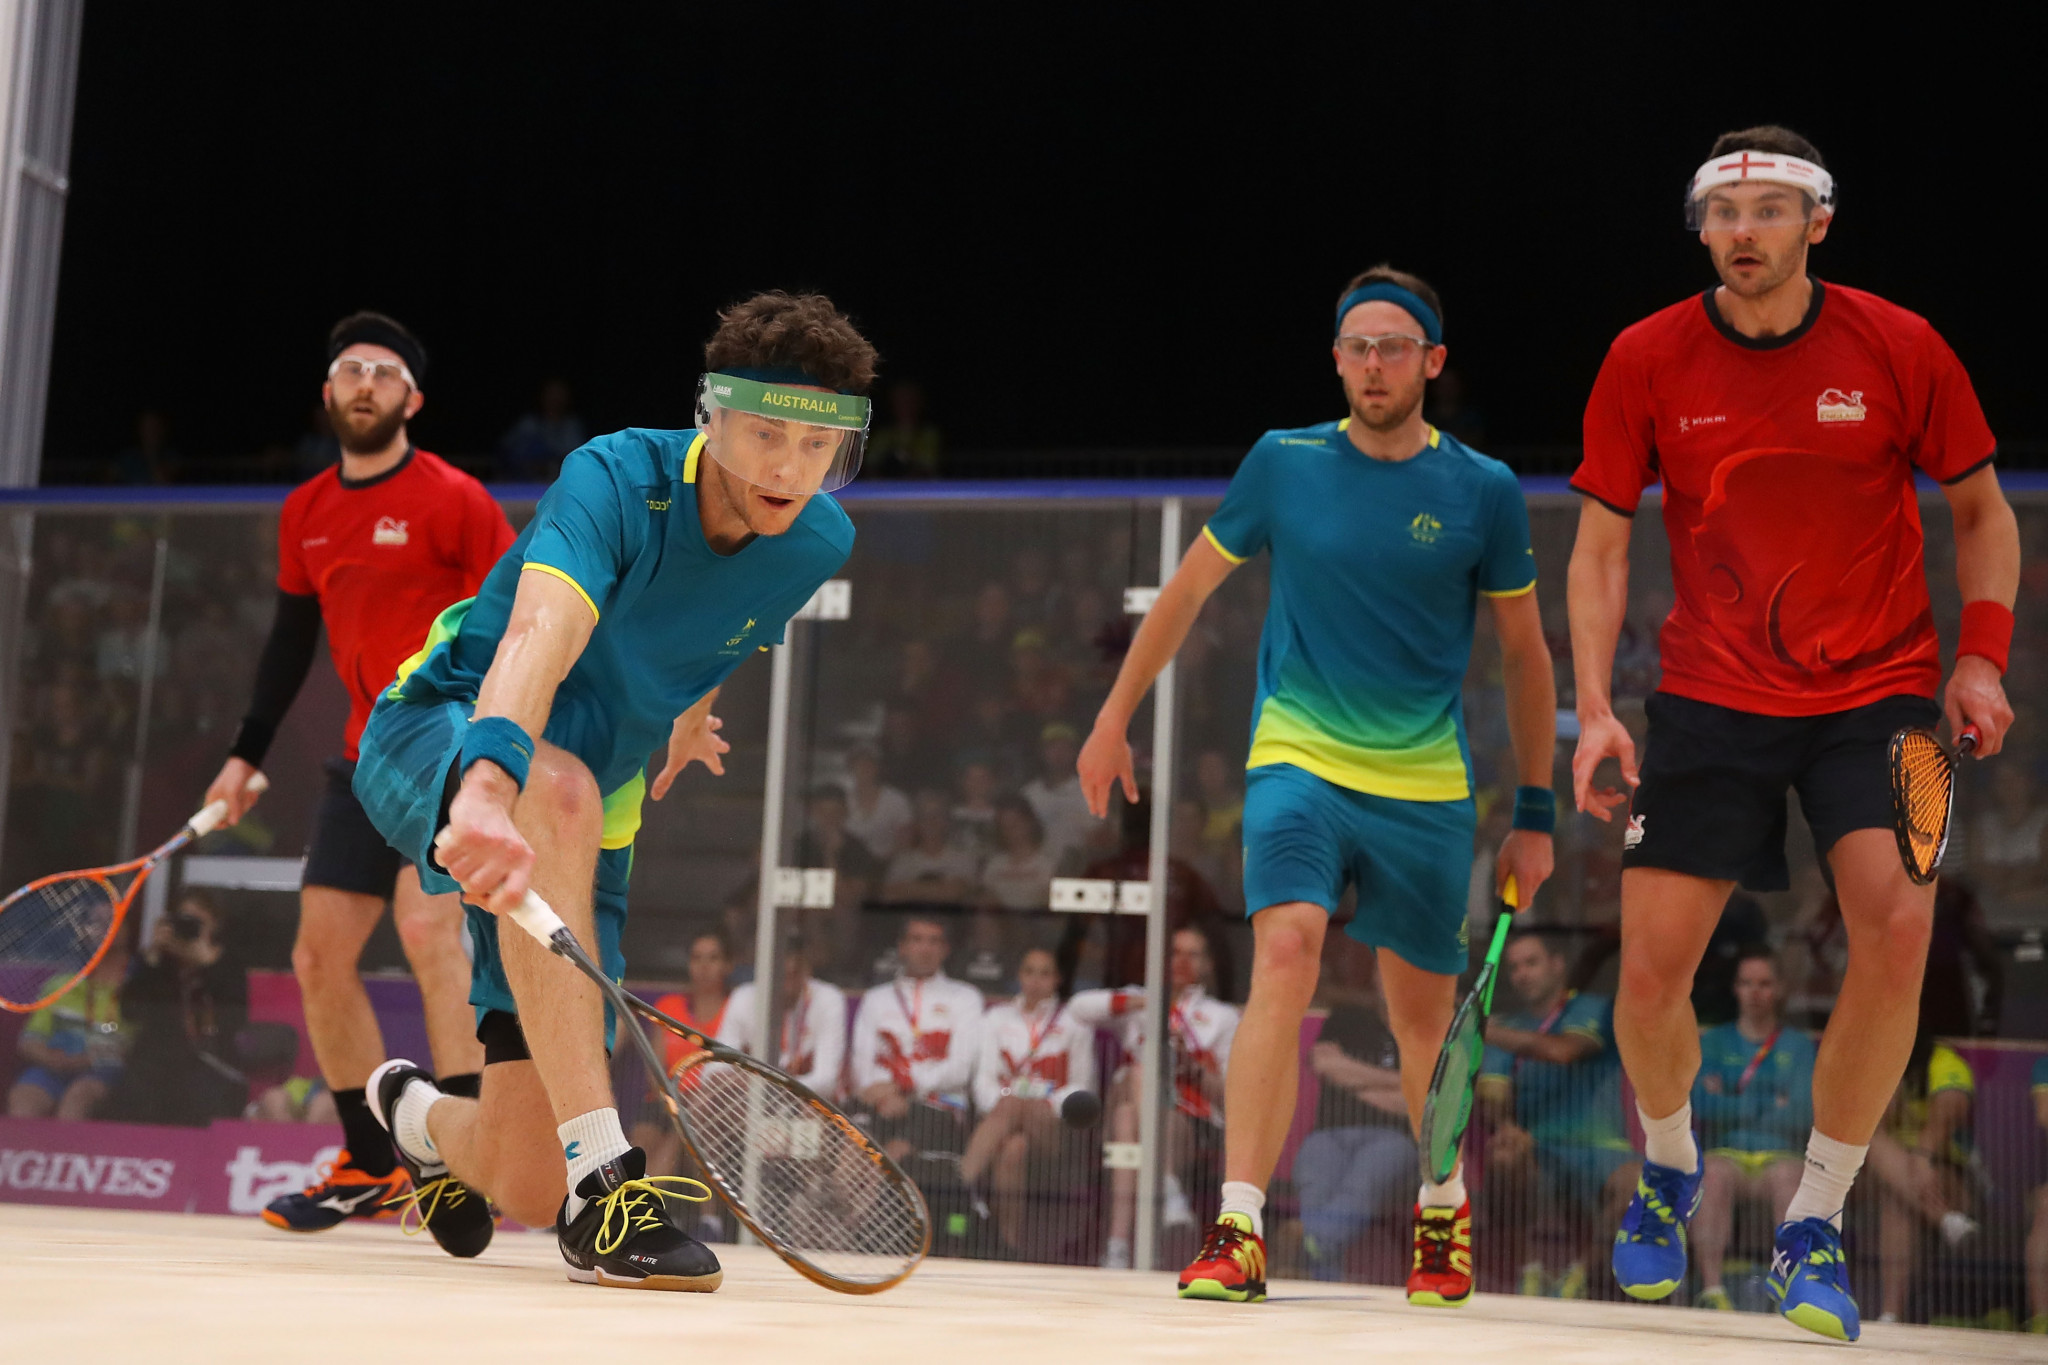 Australian's Ryan Cuskelly and Cameron Pilley are bidding to defend their World Squash Federation World Doubles Championships title in Gold Coast ©Getty Images